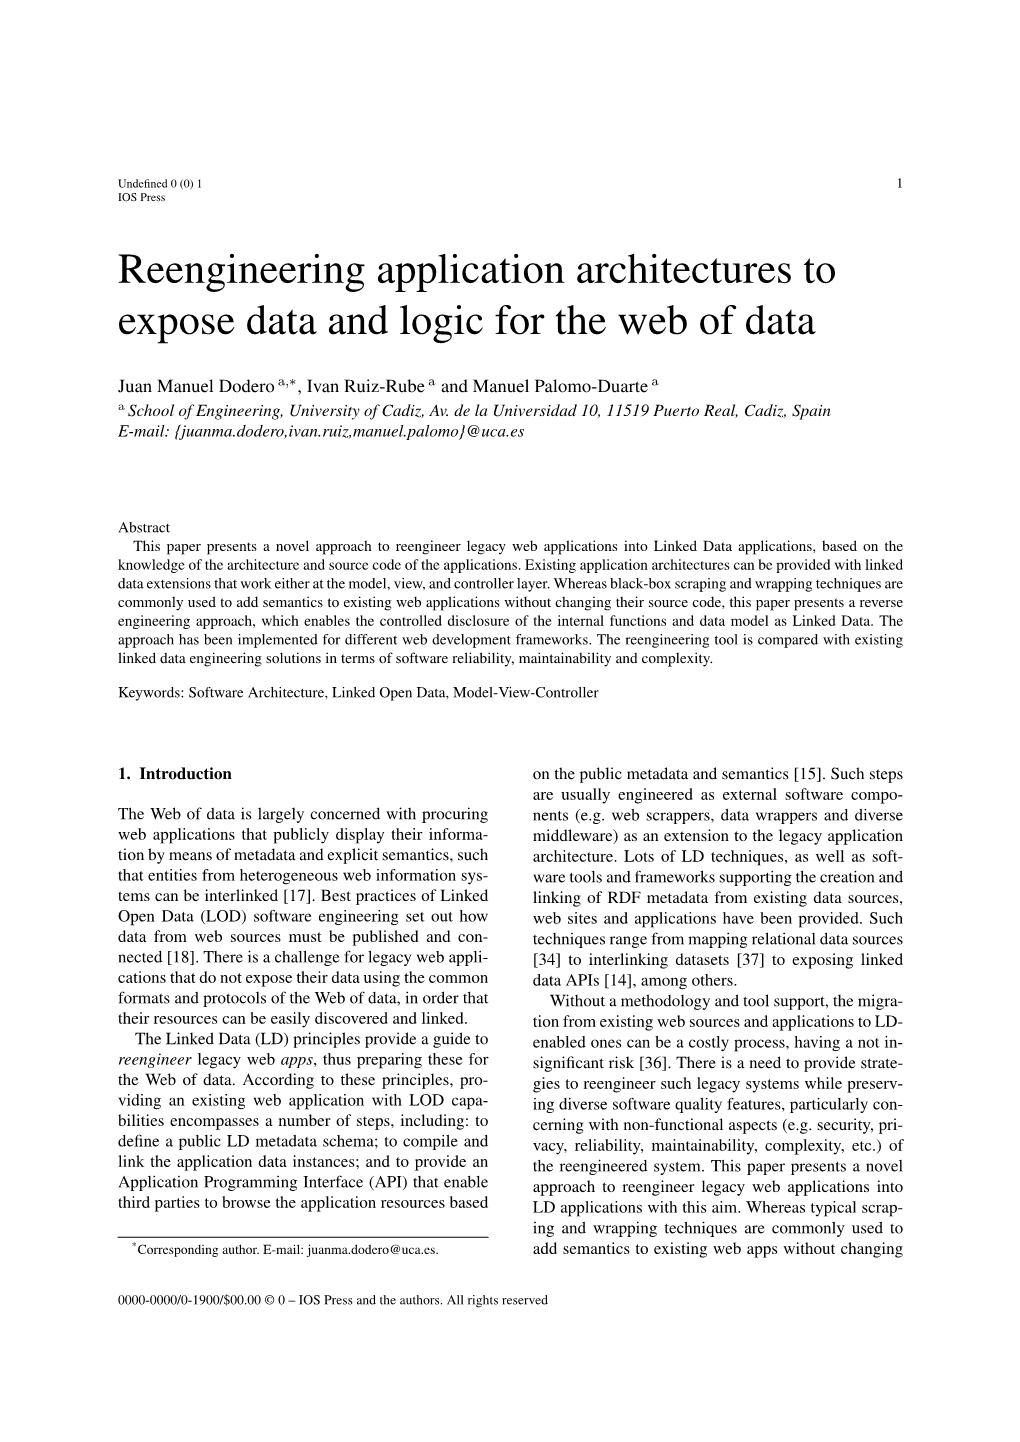 Reengineering Application Architectures to Expose Data and Logic for the Web of Data